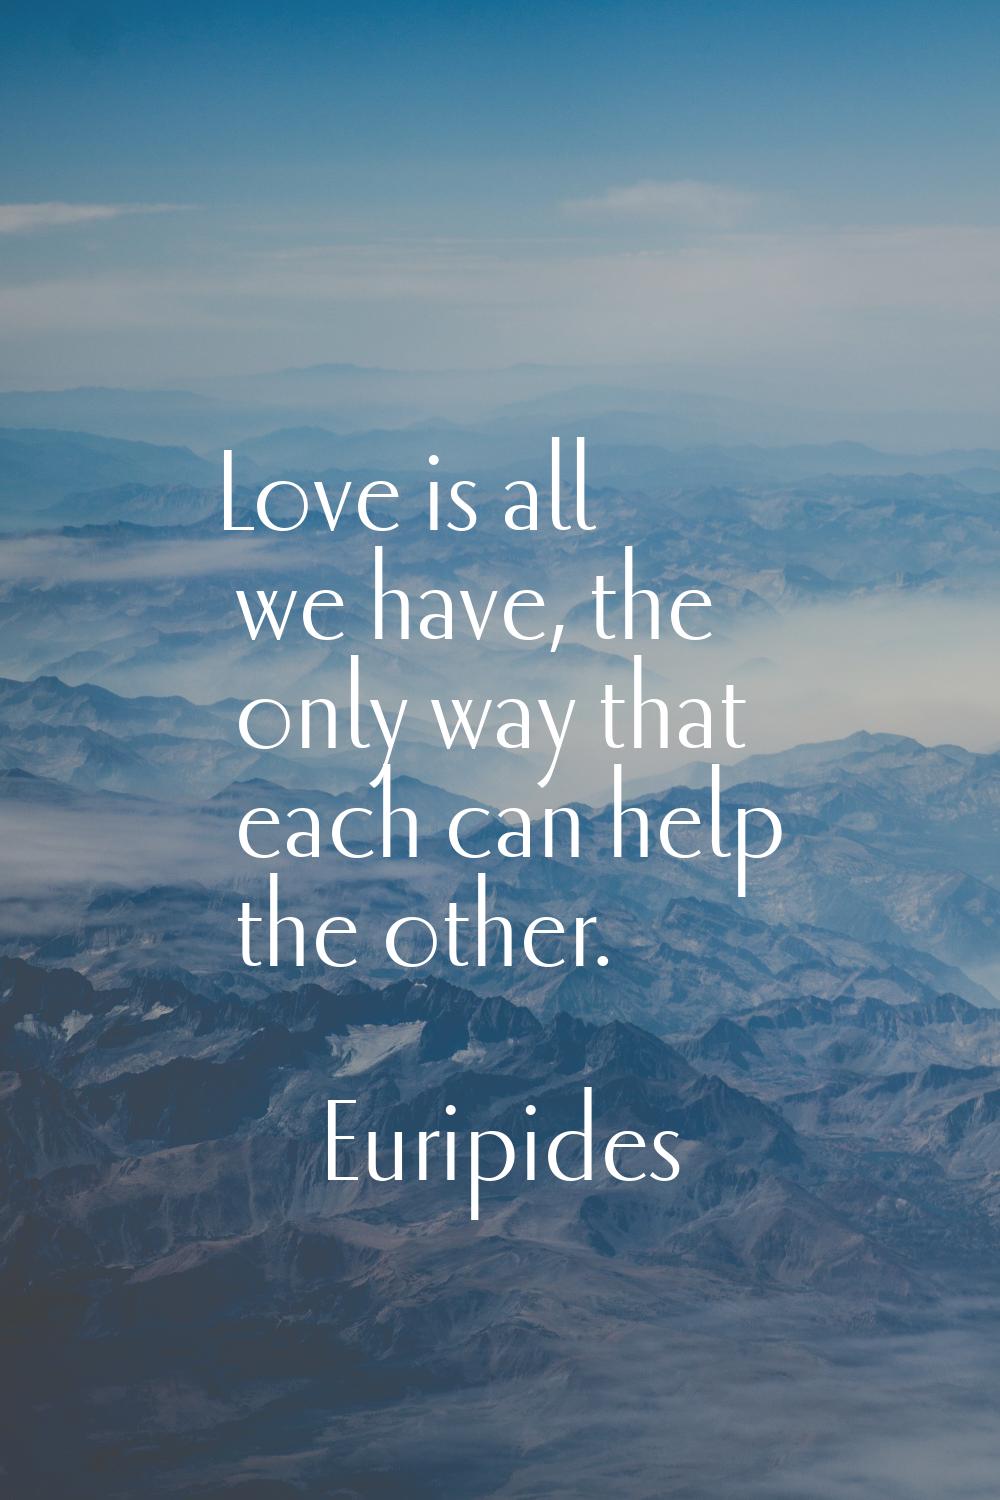 Love is all we have, the only way that each can help the other.